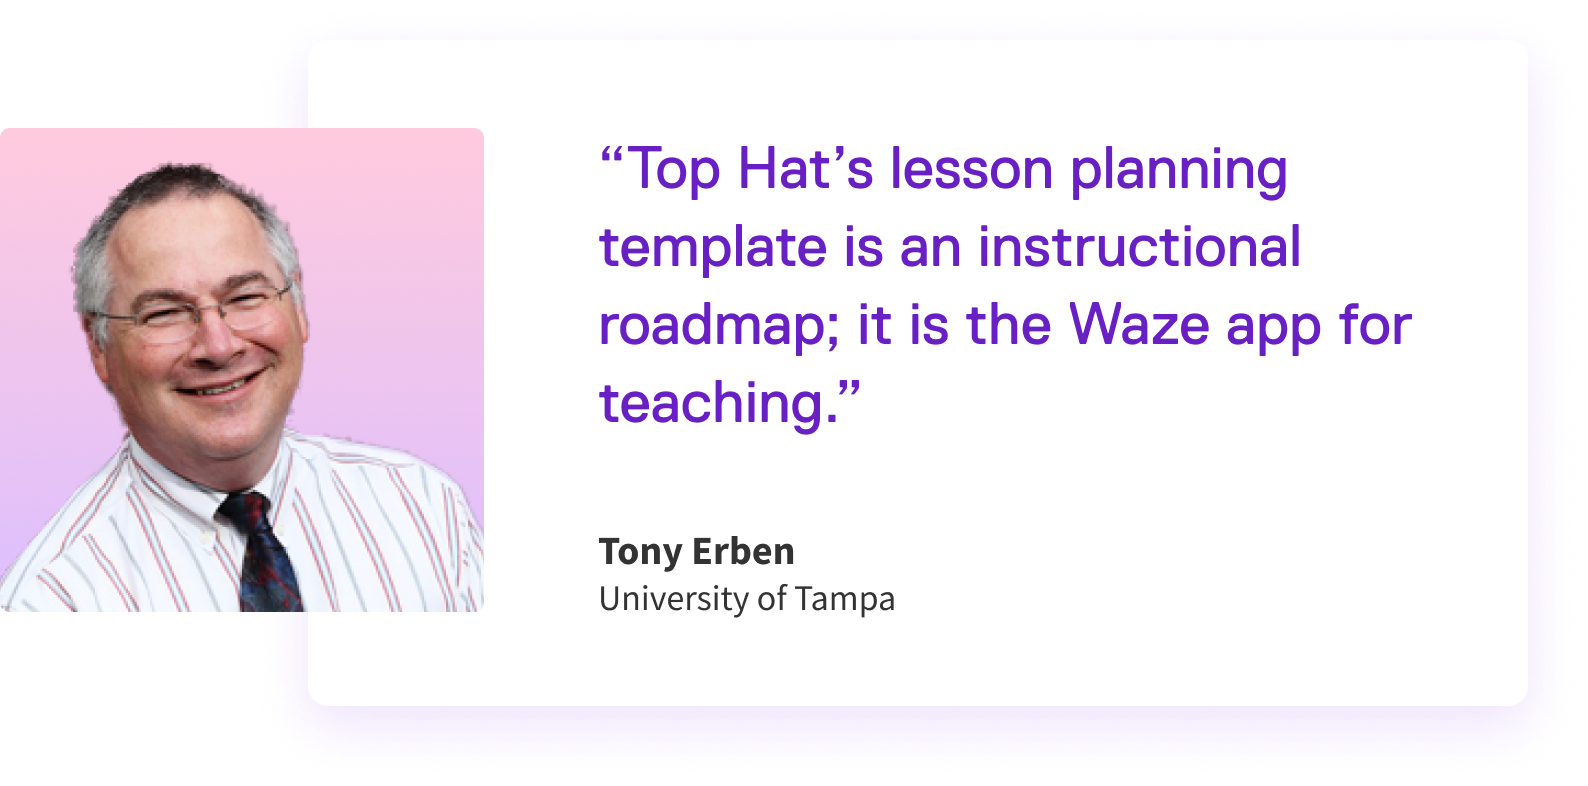 A quote from University of Tampa professor Tony Erben with an image of him beside it